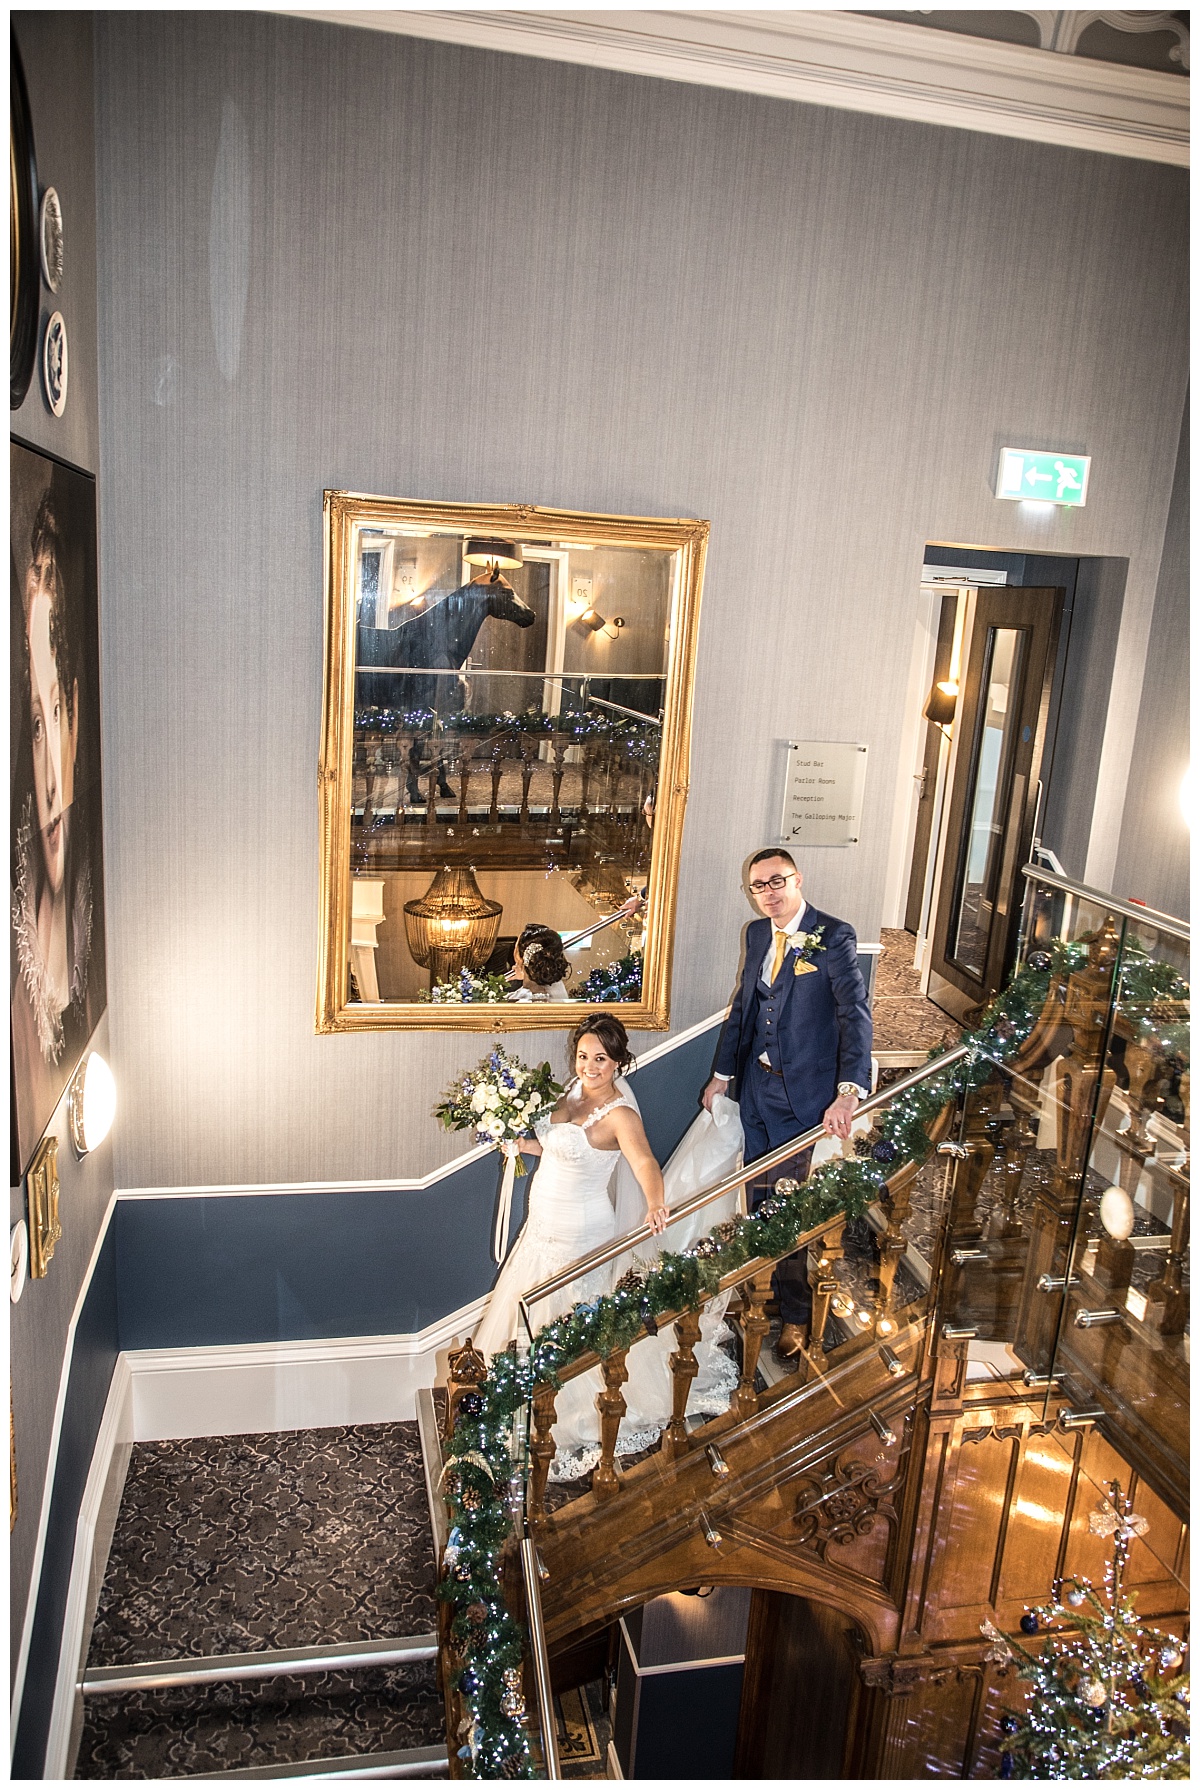 Wedding Photography Manchester - Jemma and Mark's Oddfellows On The Park NYE Wedding 66